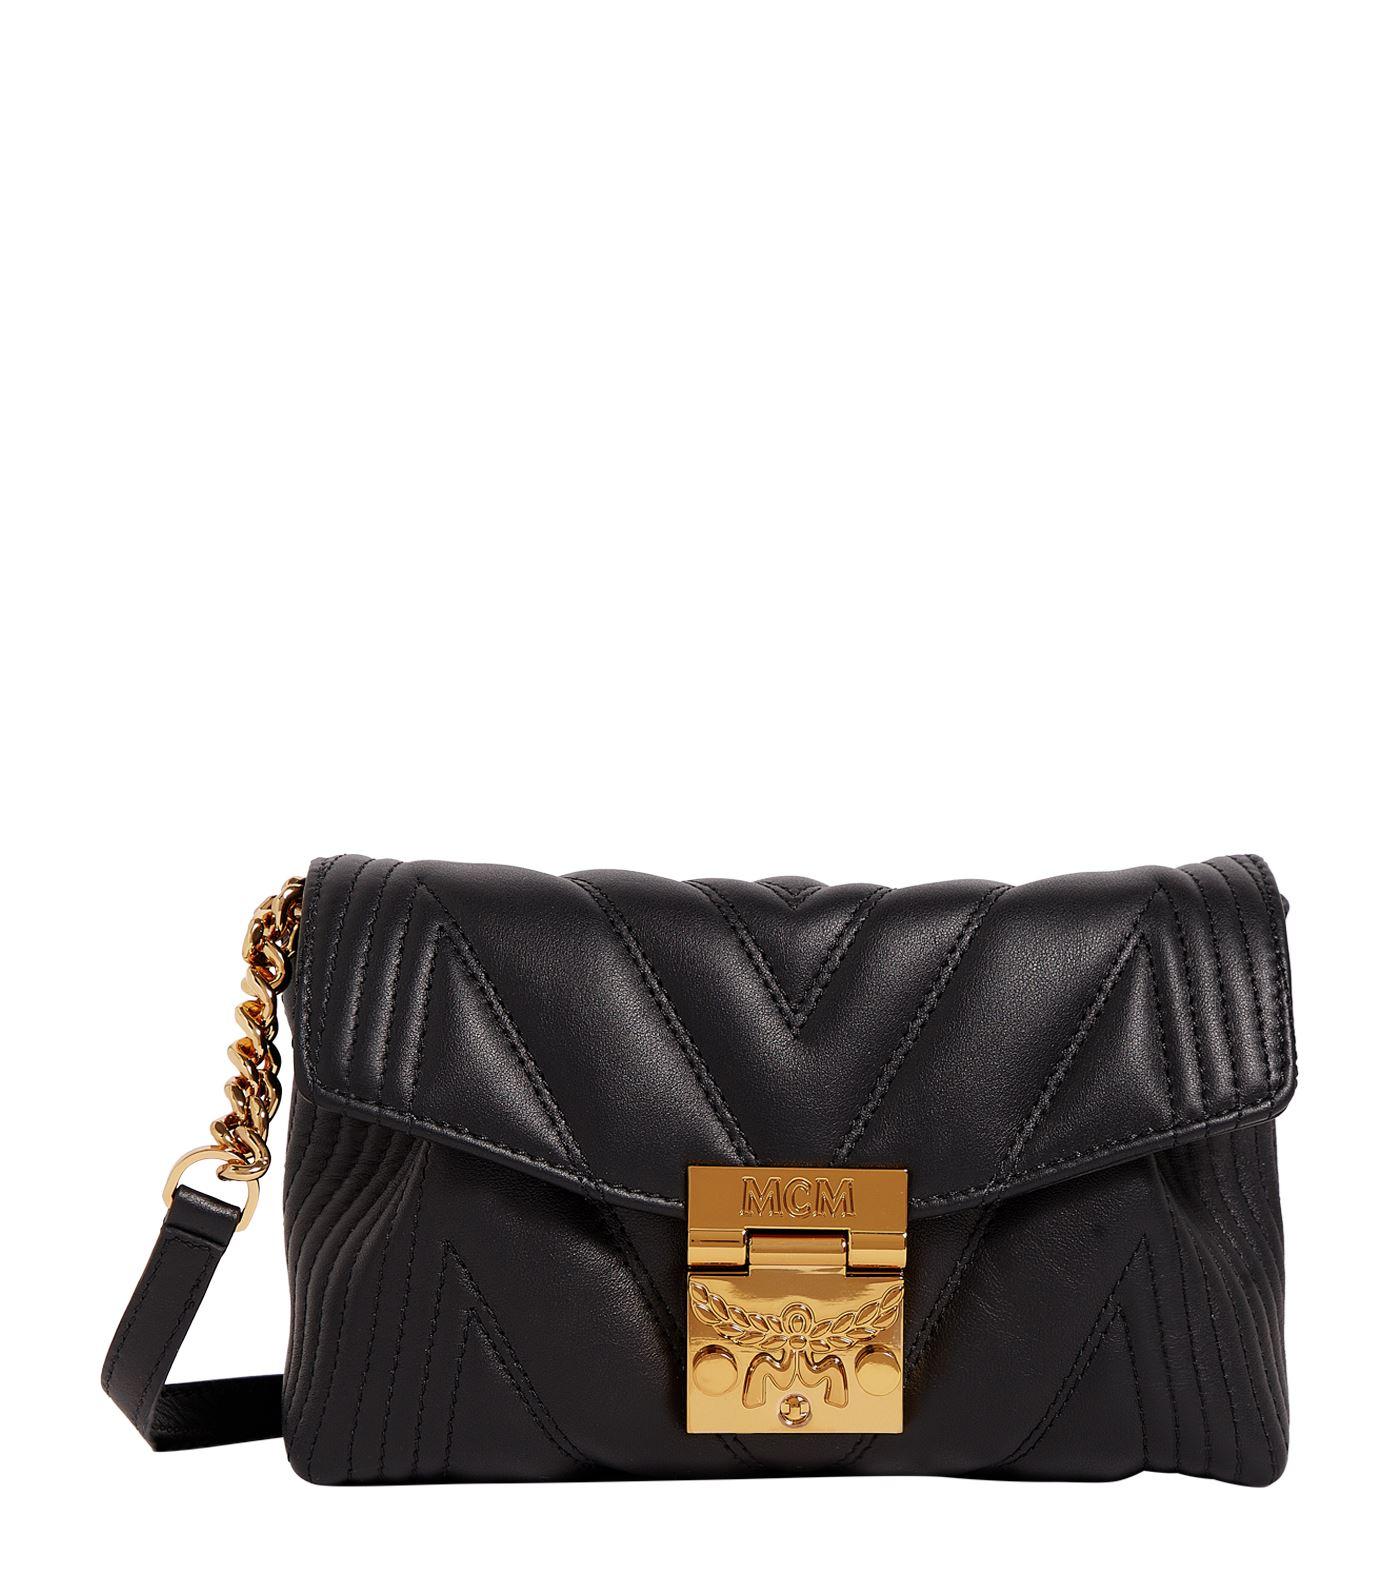 Lyst - MCM Leather Quilted Belt Bag in Black